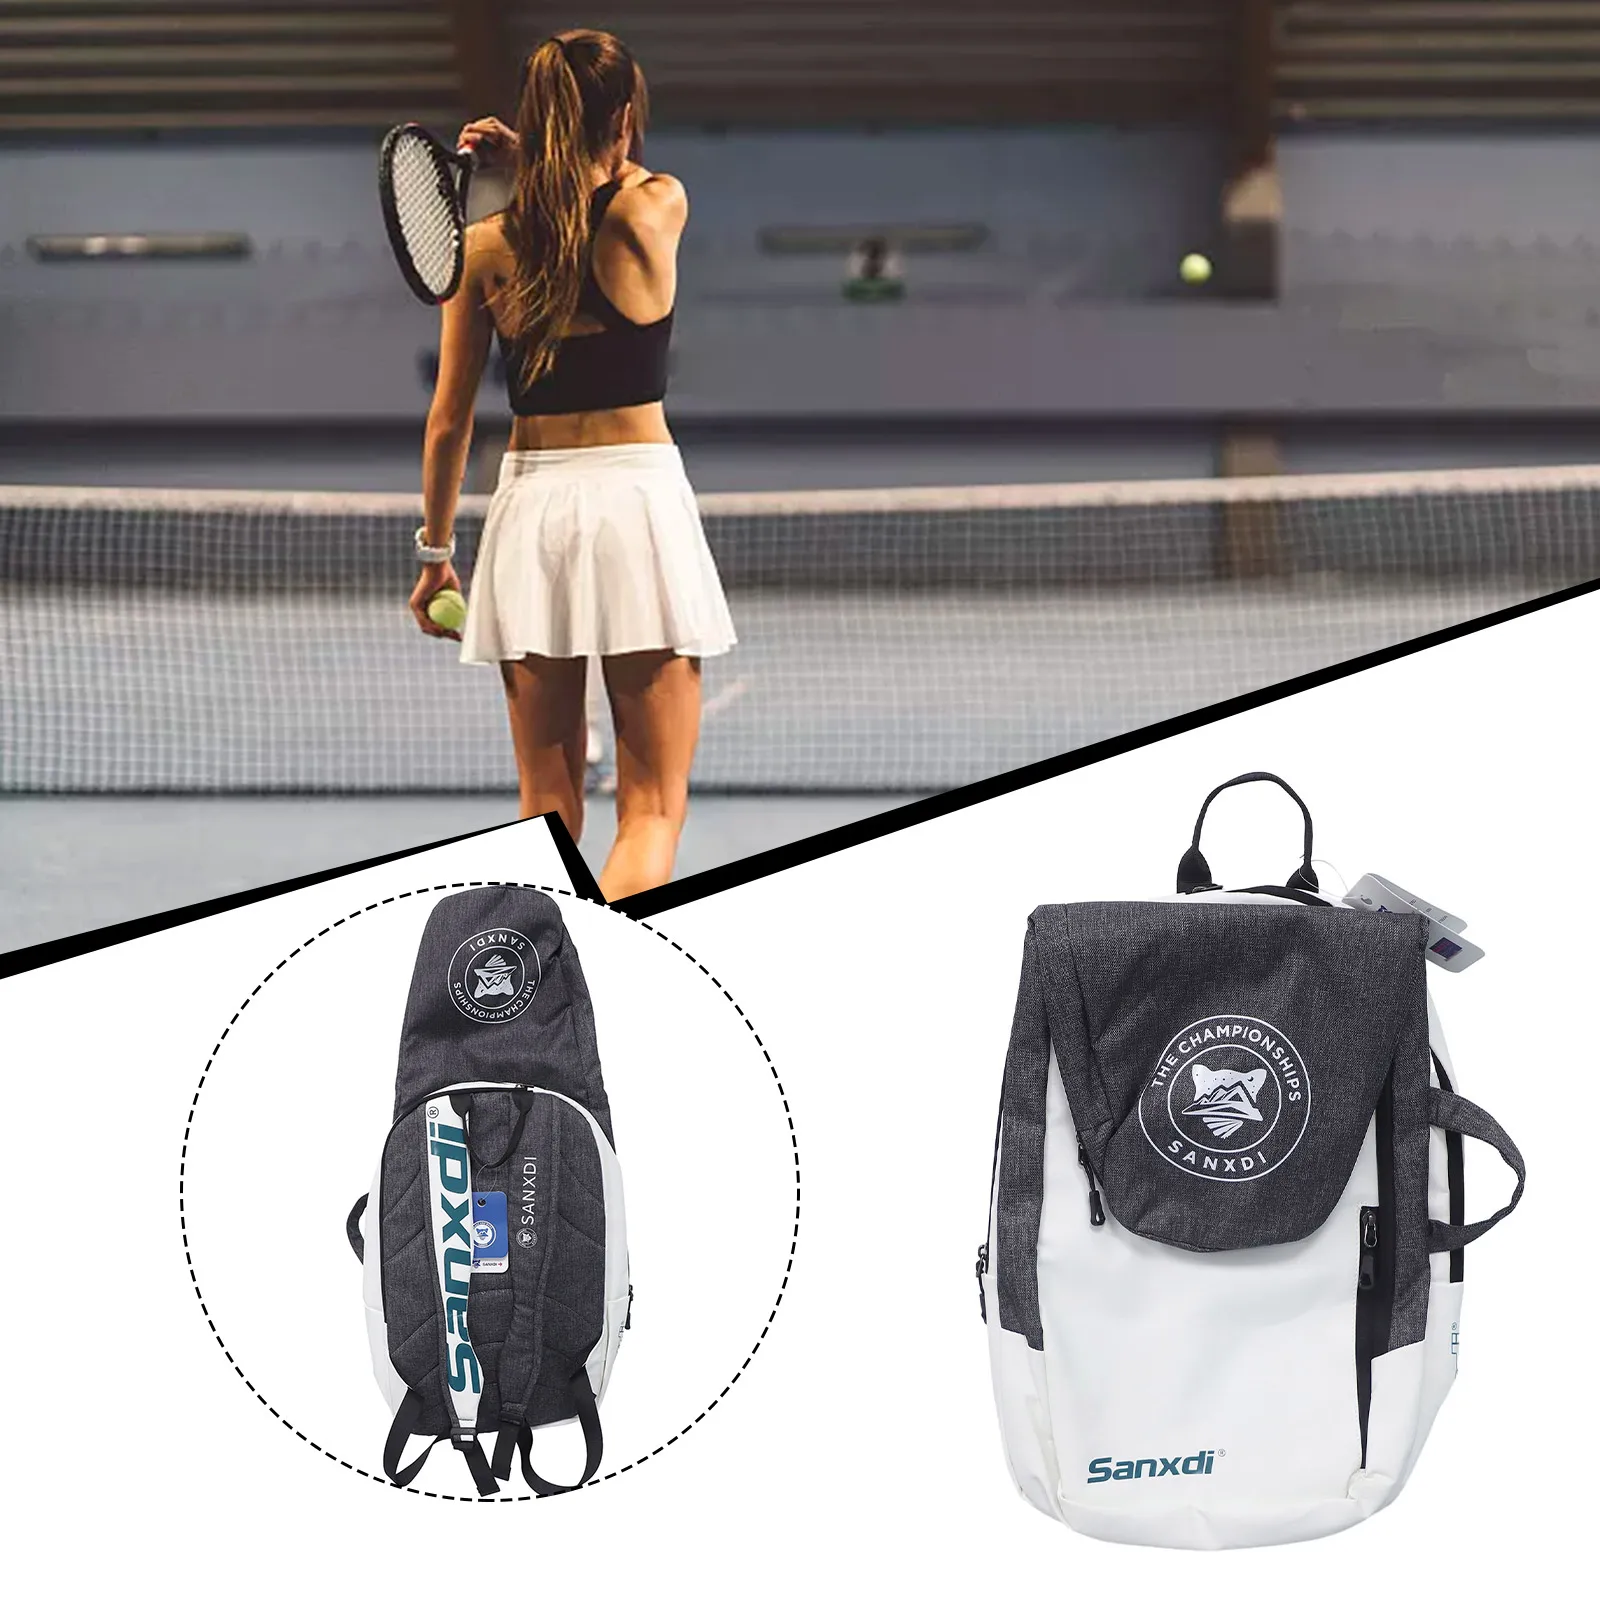 

Fashionable Light Recyclable Durable Comfortable Backpack Handbag Racquets Sleek Design Carrying Easily Switch